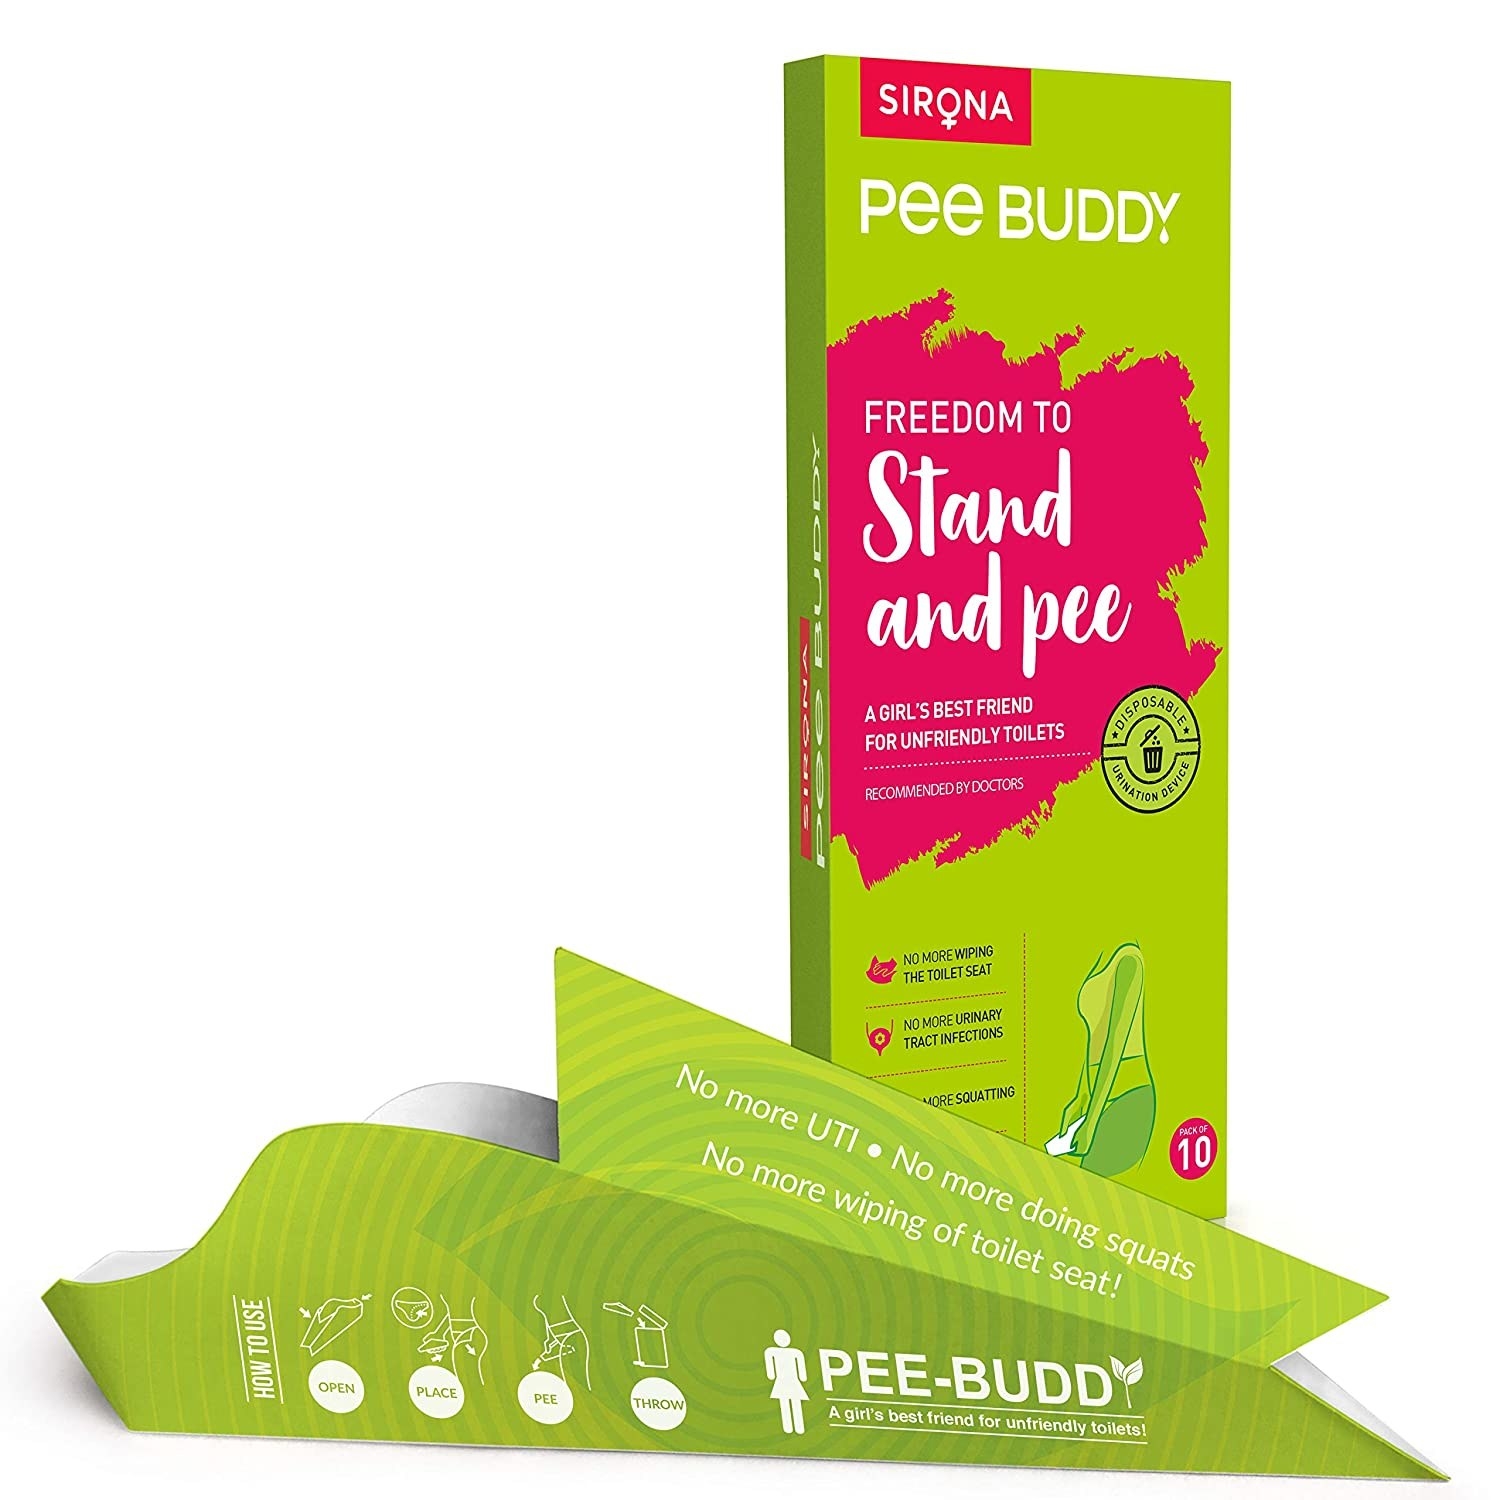 A disposable stand and pee funnel for ladies in green kept beside the box